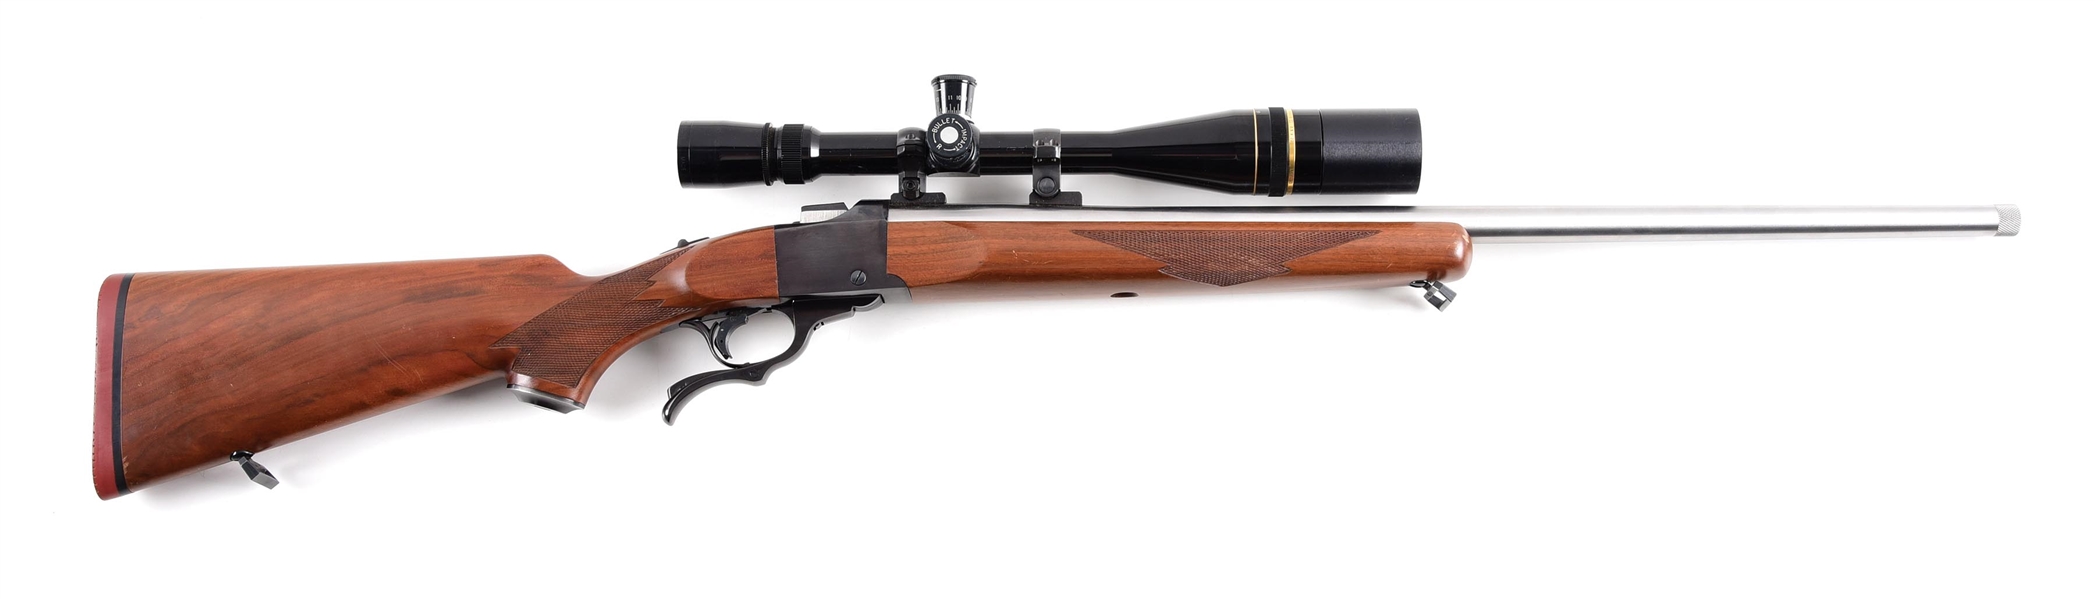 (M) RUGER NO. 1 SINGLE SHOT RIFLE FITTED WITH A VIRGIN VALLEY .223 ACKLEY IMPROVED STAINLESS STEEL BARREL.